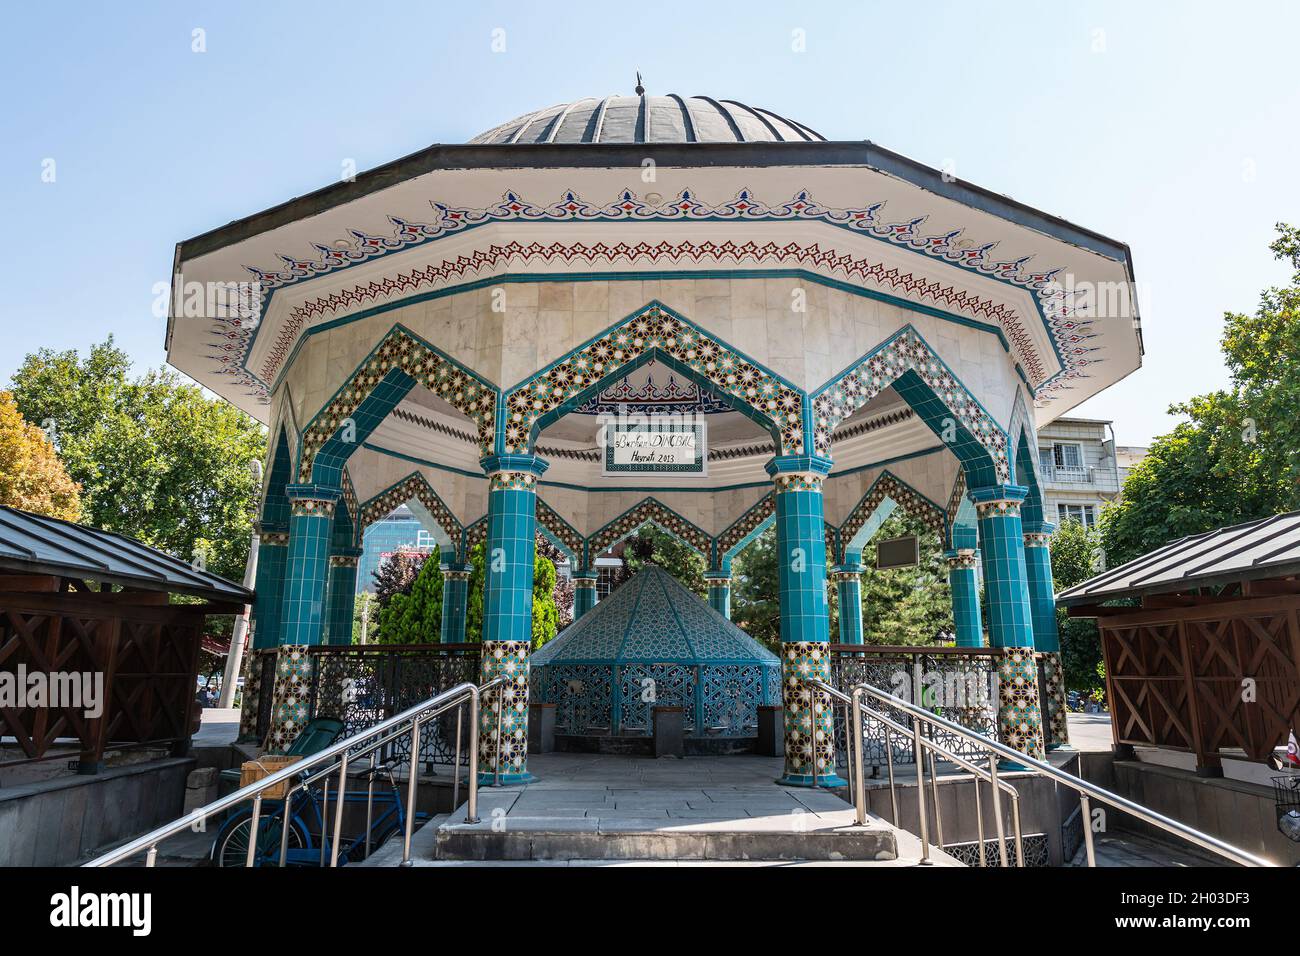 Kayseri Hunat Hatun Mosque Breathtaking Picturesque View of Wudu Pavilion on a Blue Sky Day in Summer Stock Photo